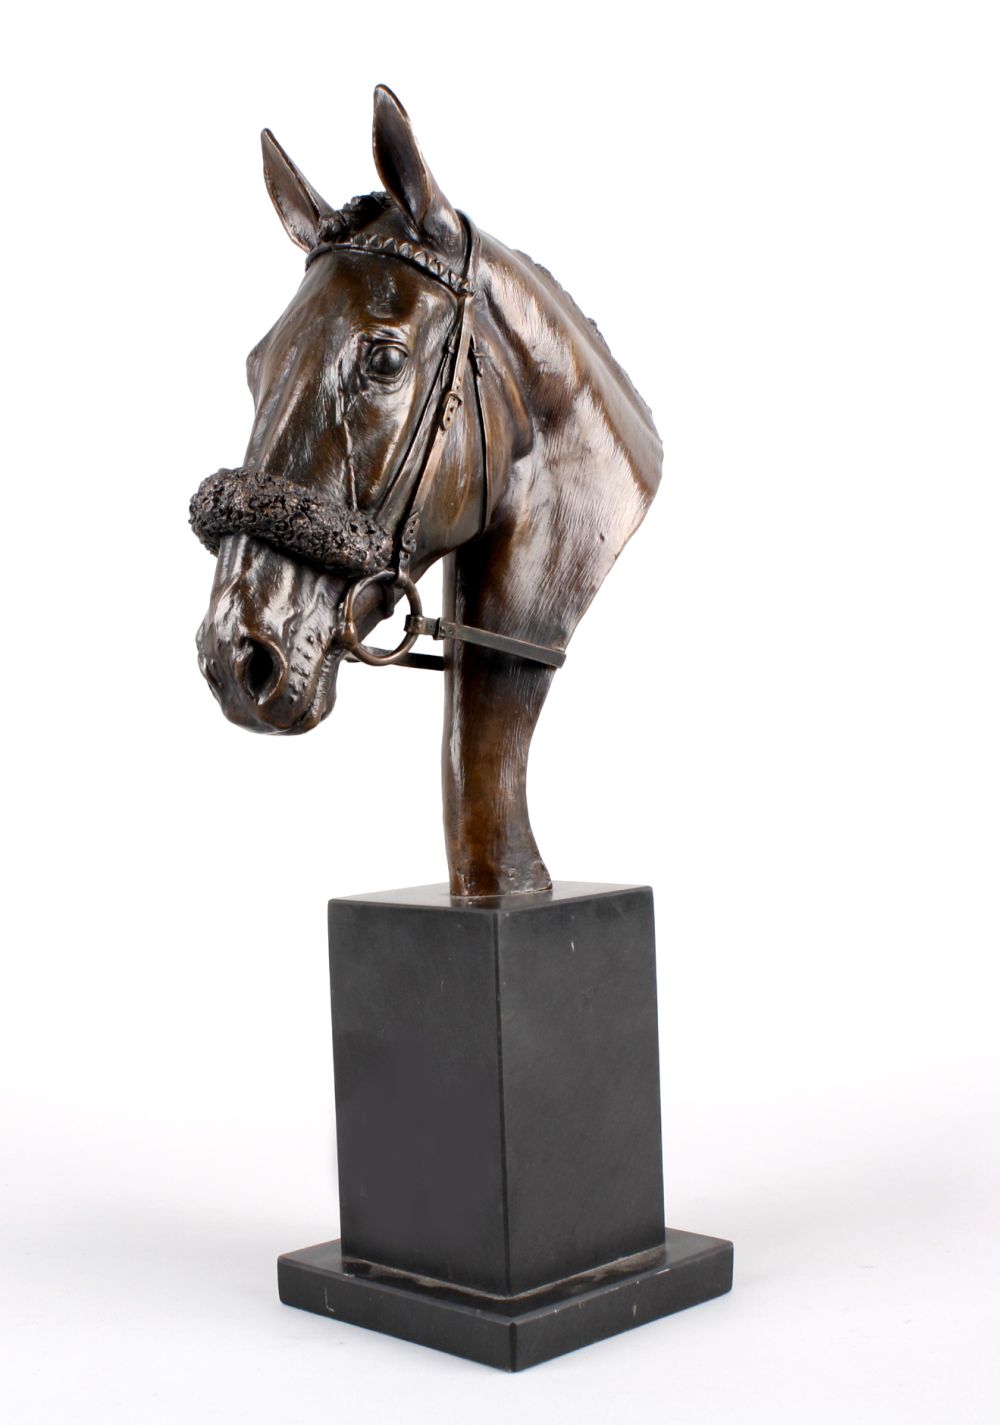 Denise Dutton, late 20th century, a patinated bronze model of the head of a racehorse, portrayed